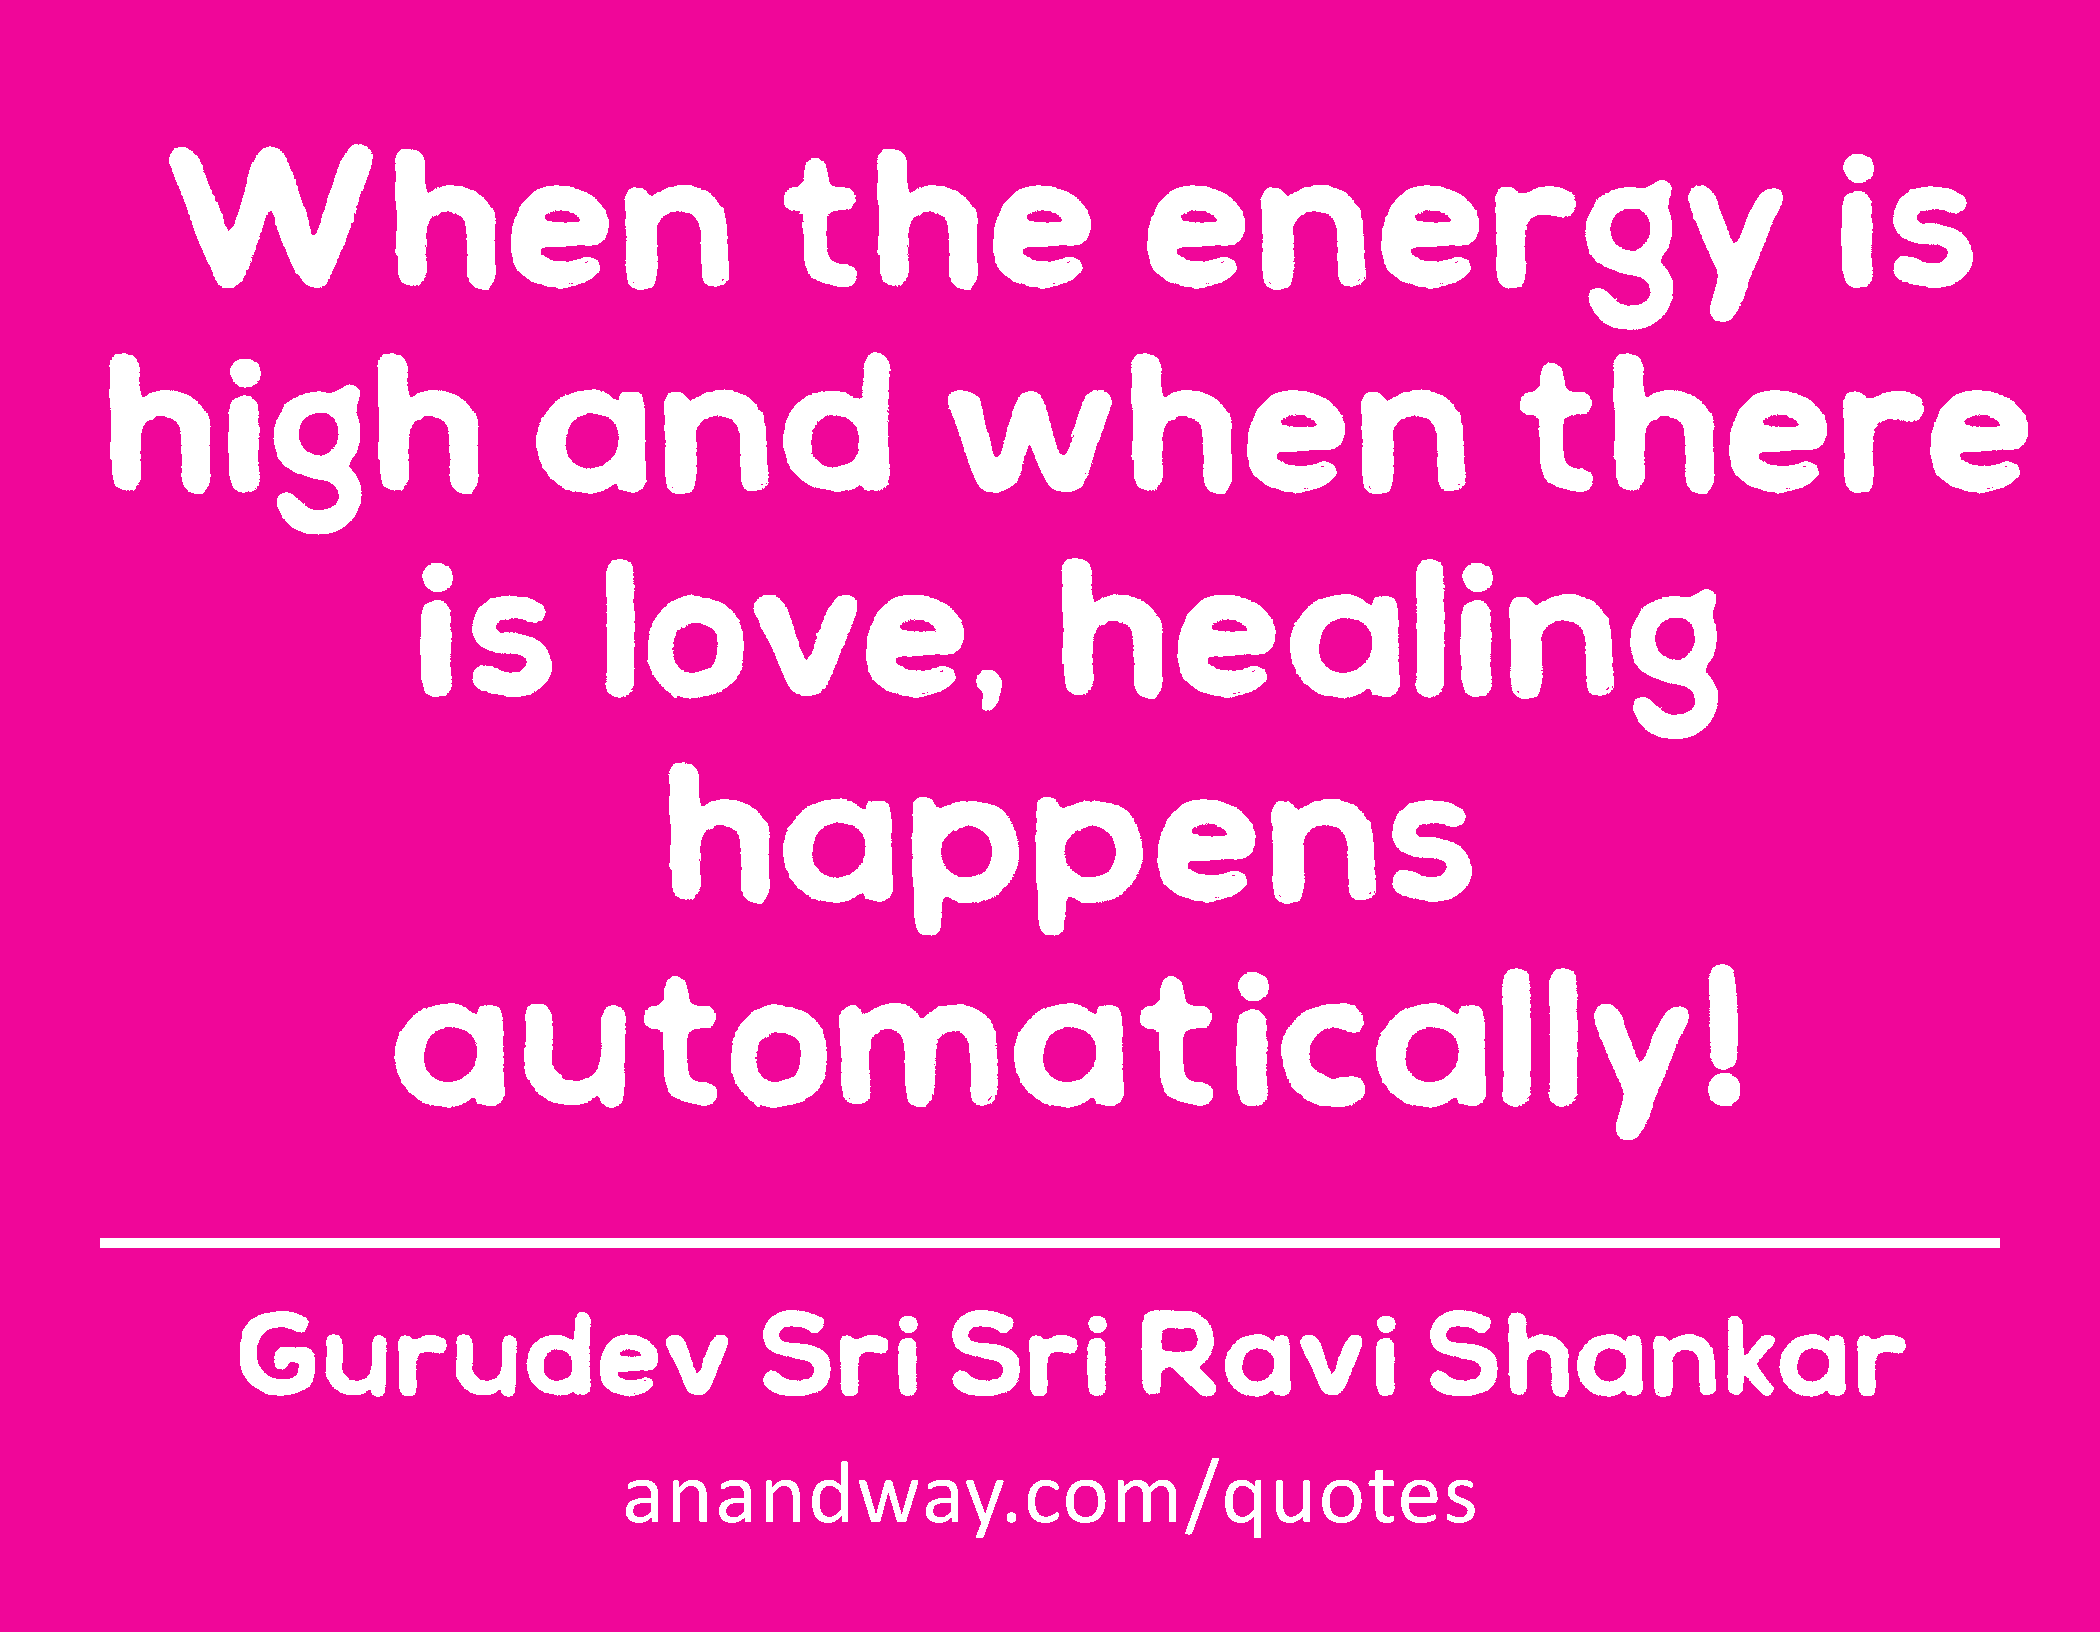 When the energy is high and when there is love, healing happens automatically! 
 -Gurudev Sri Sri Ravi Shankar